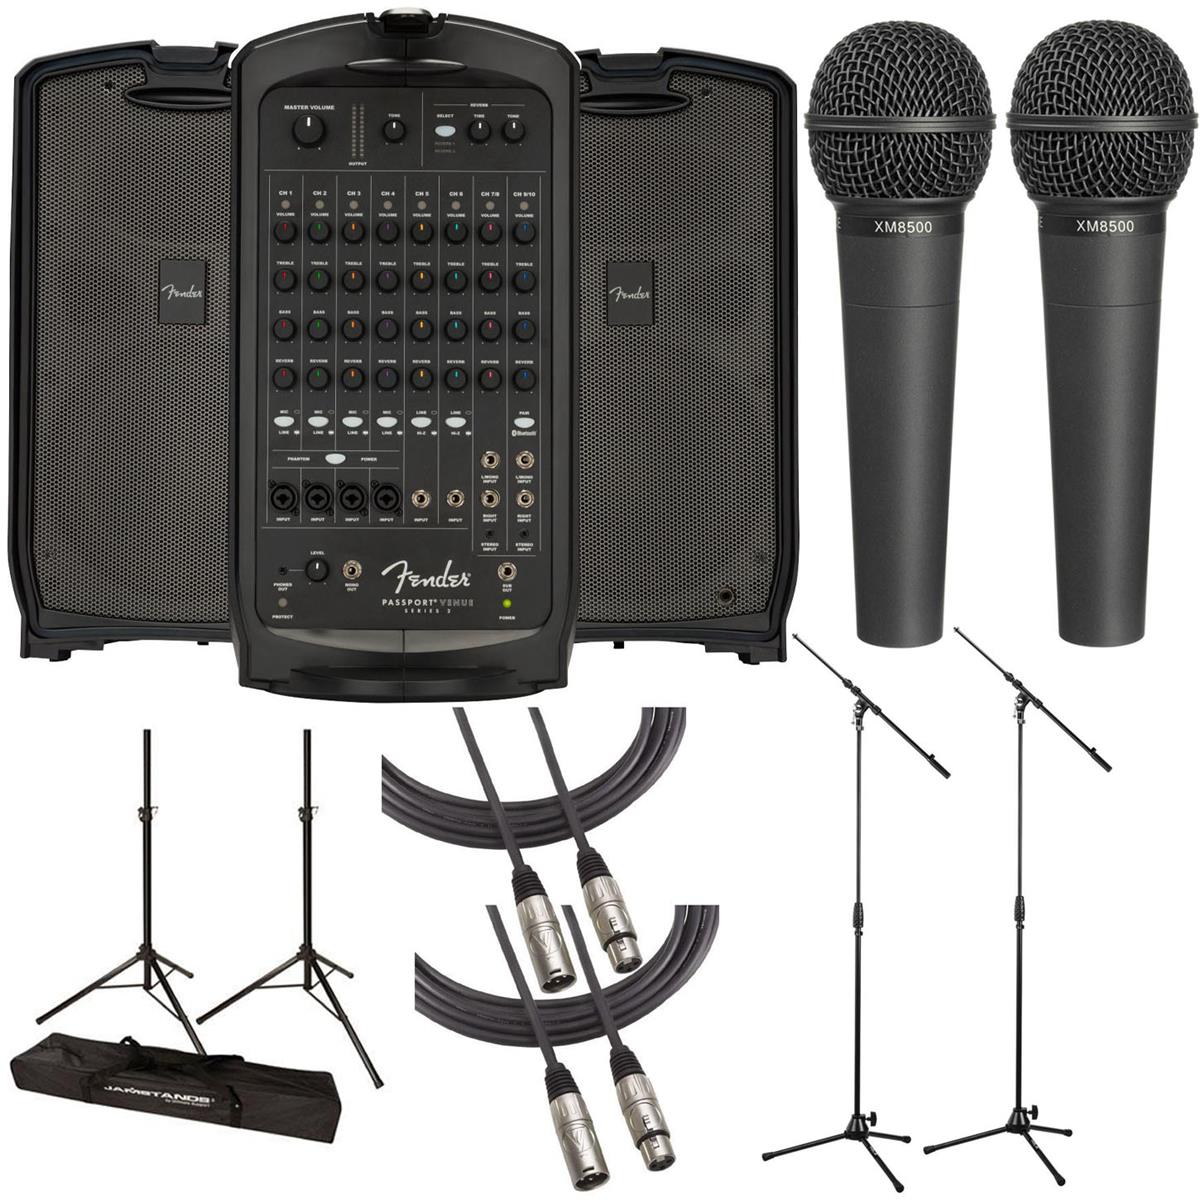 Fender Passport Event Series 2 375W 7-CH PA System with 2x Stands, Mic, Cable -  6944000000 C